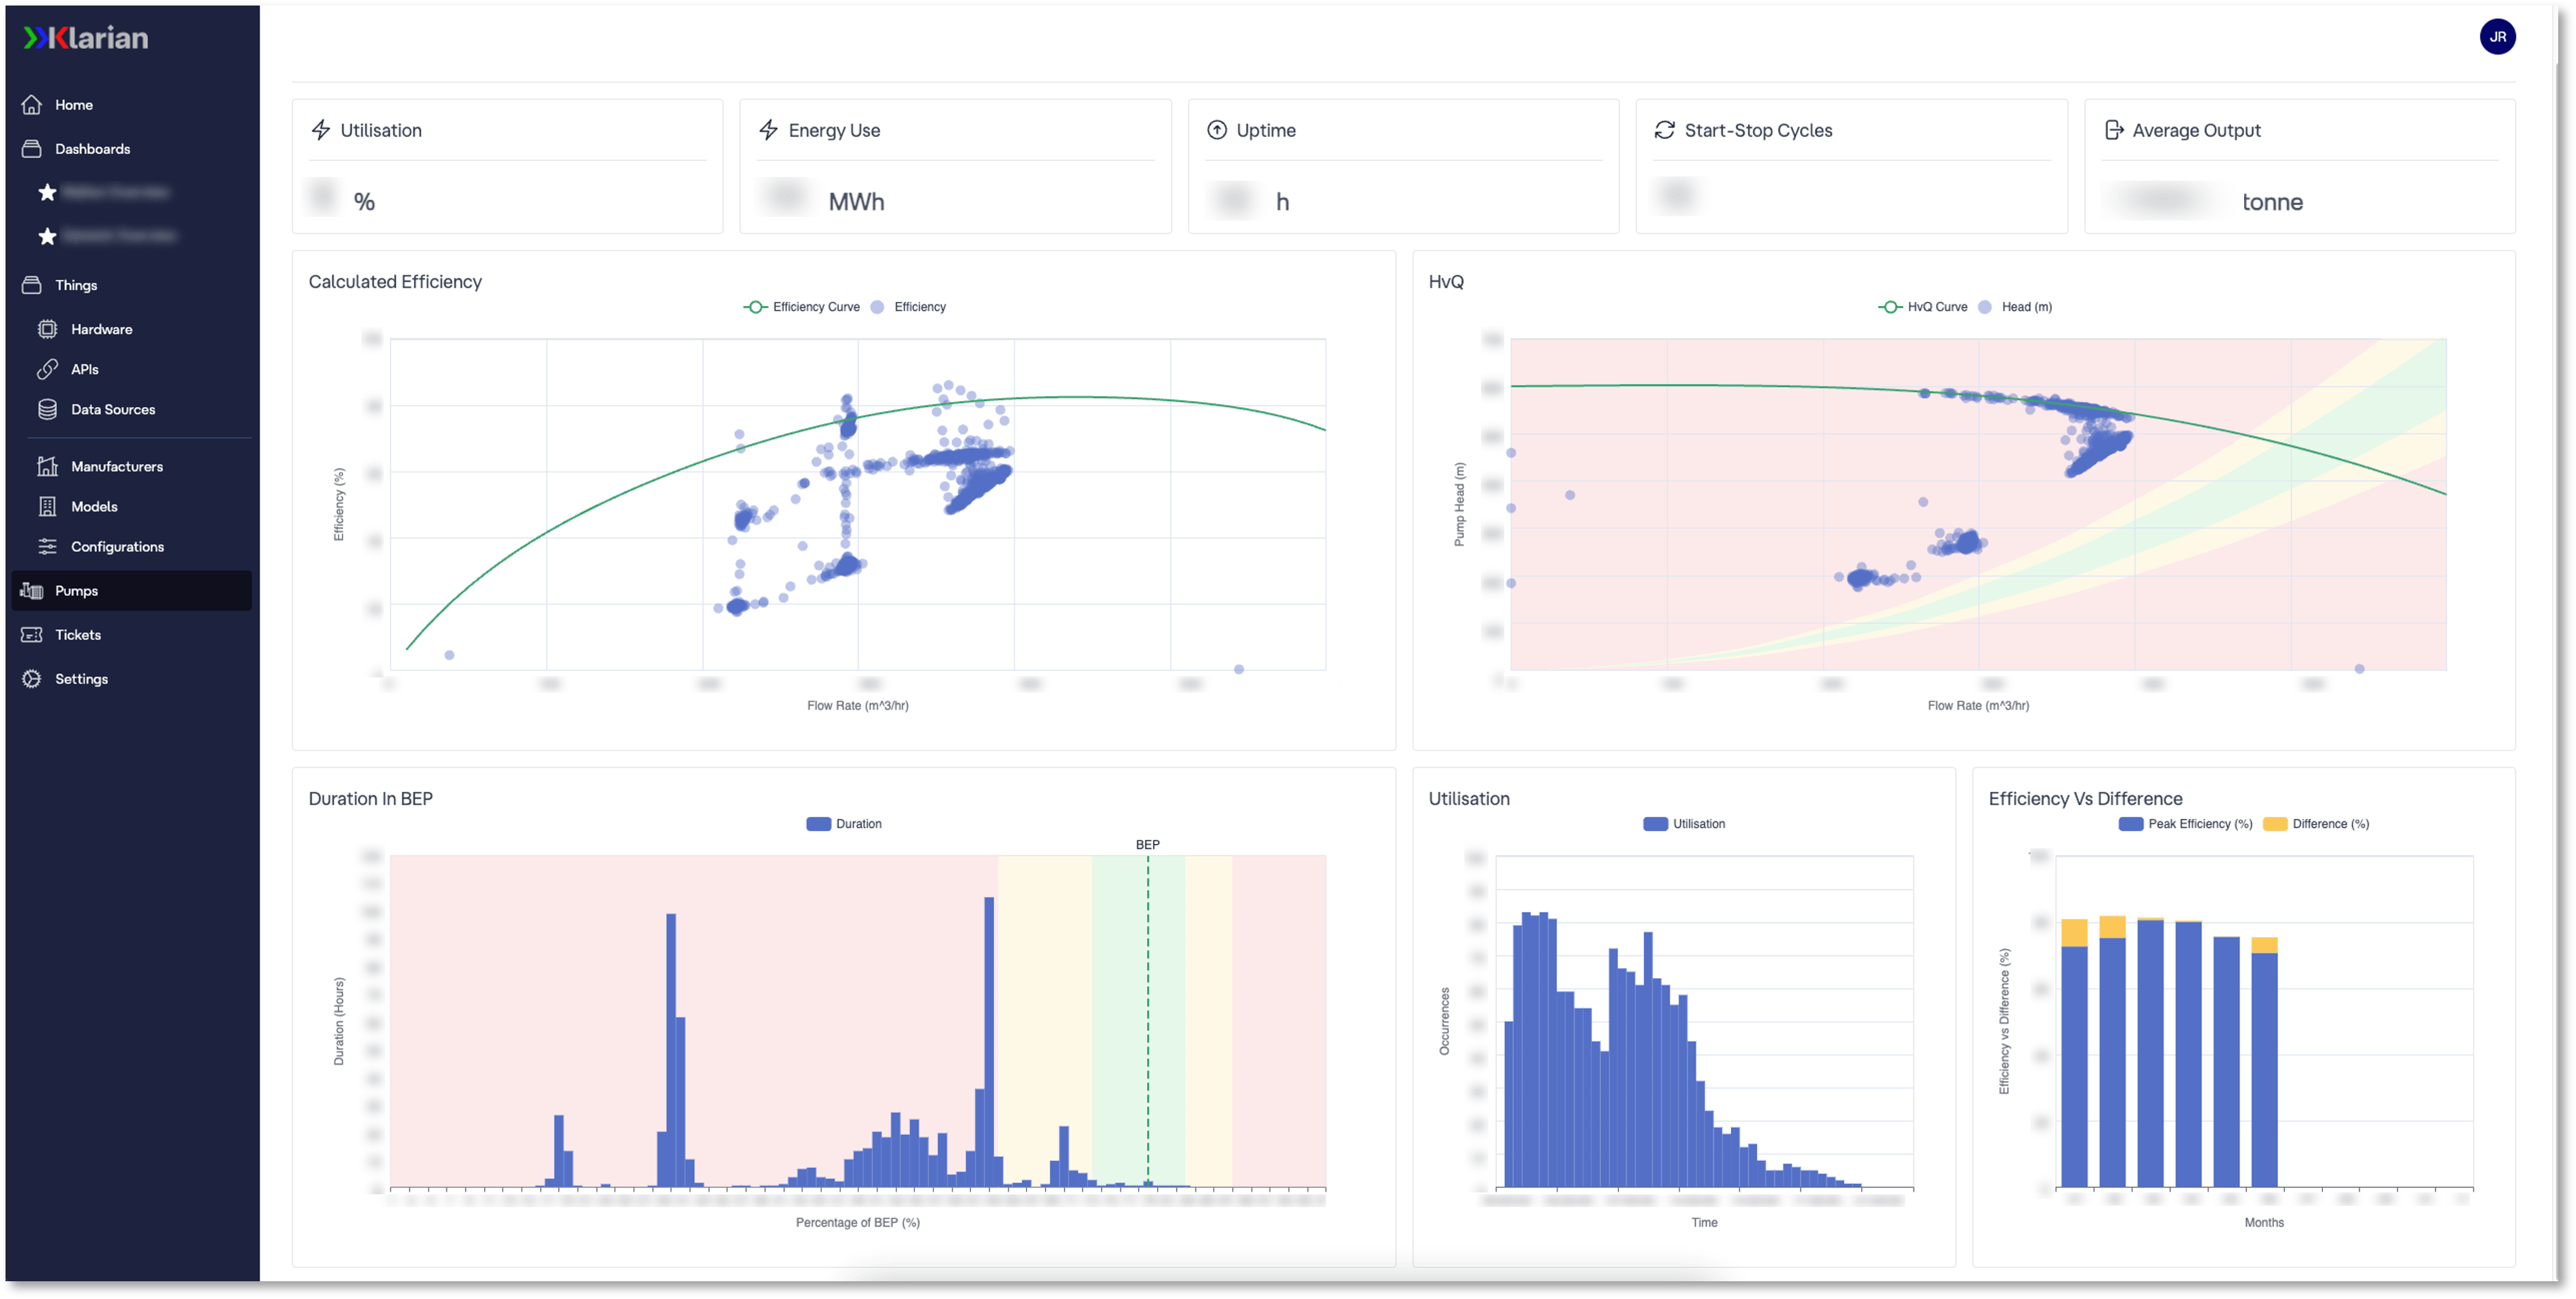 Screenshot of the front end of Klarian's Digipipe platform depicting various graphs, including a pump efficiency curve.